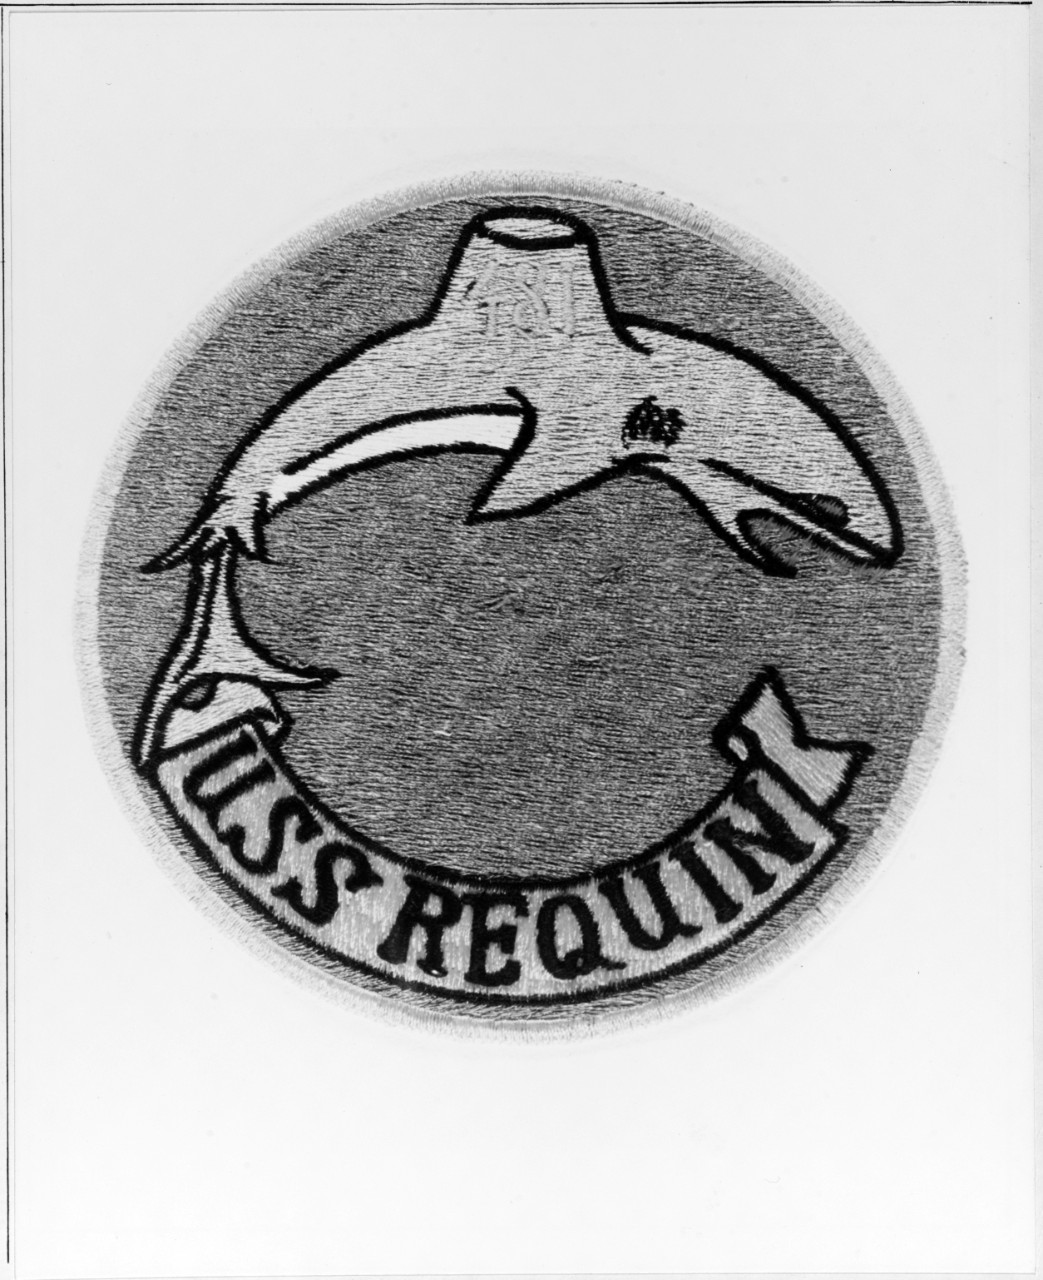 Insignia:  USS REQUIN (SS-481)